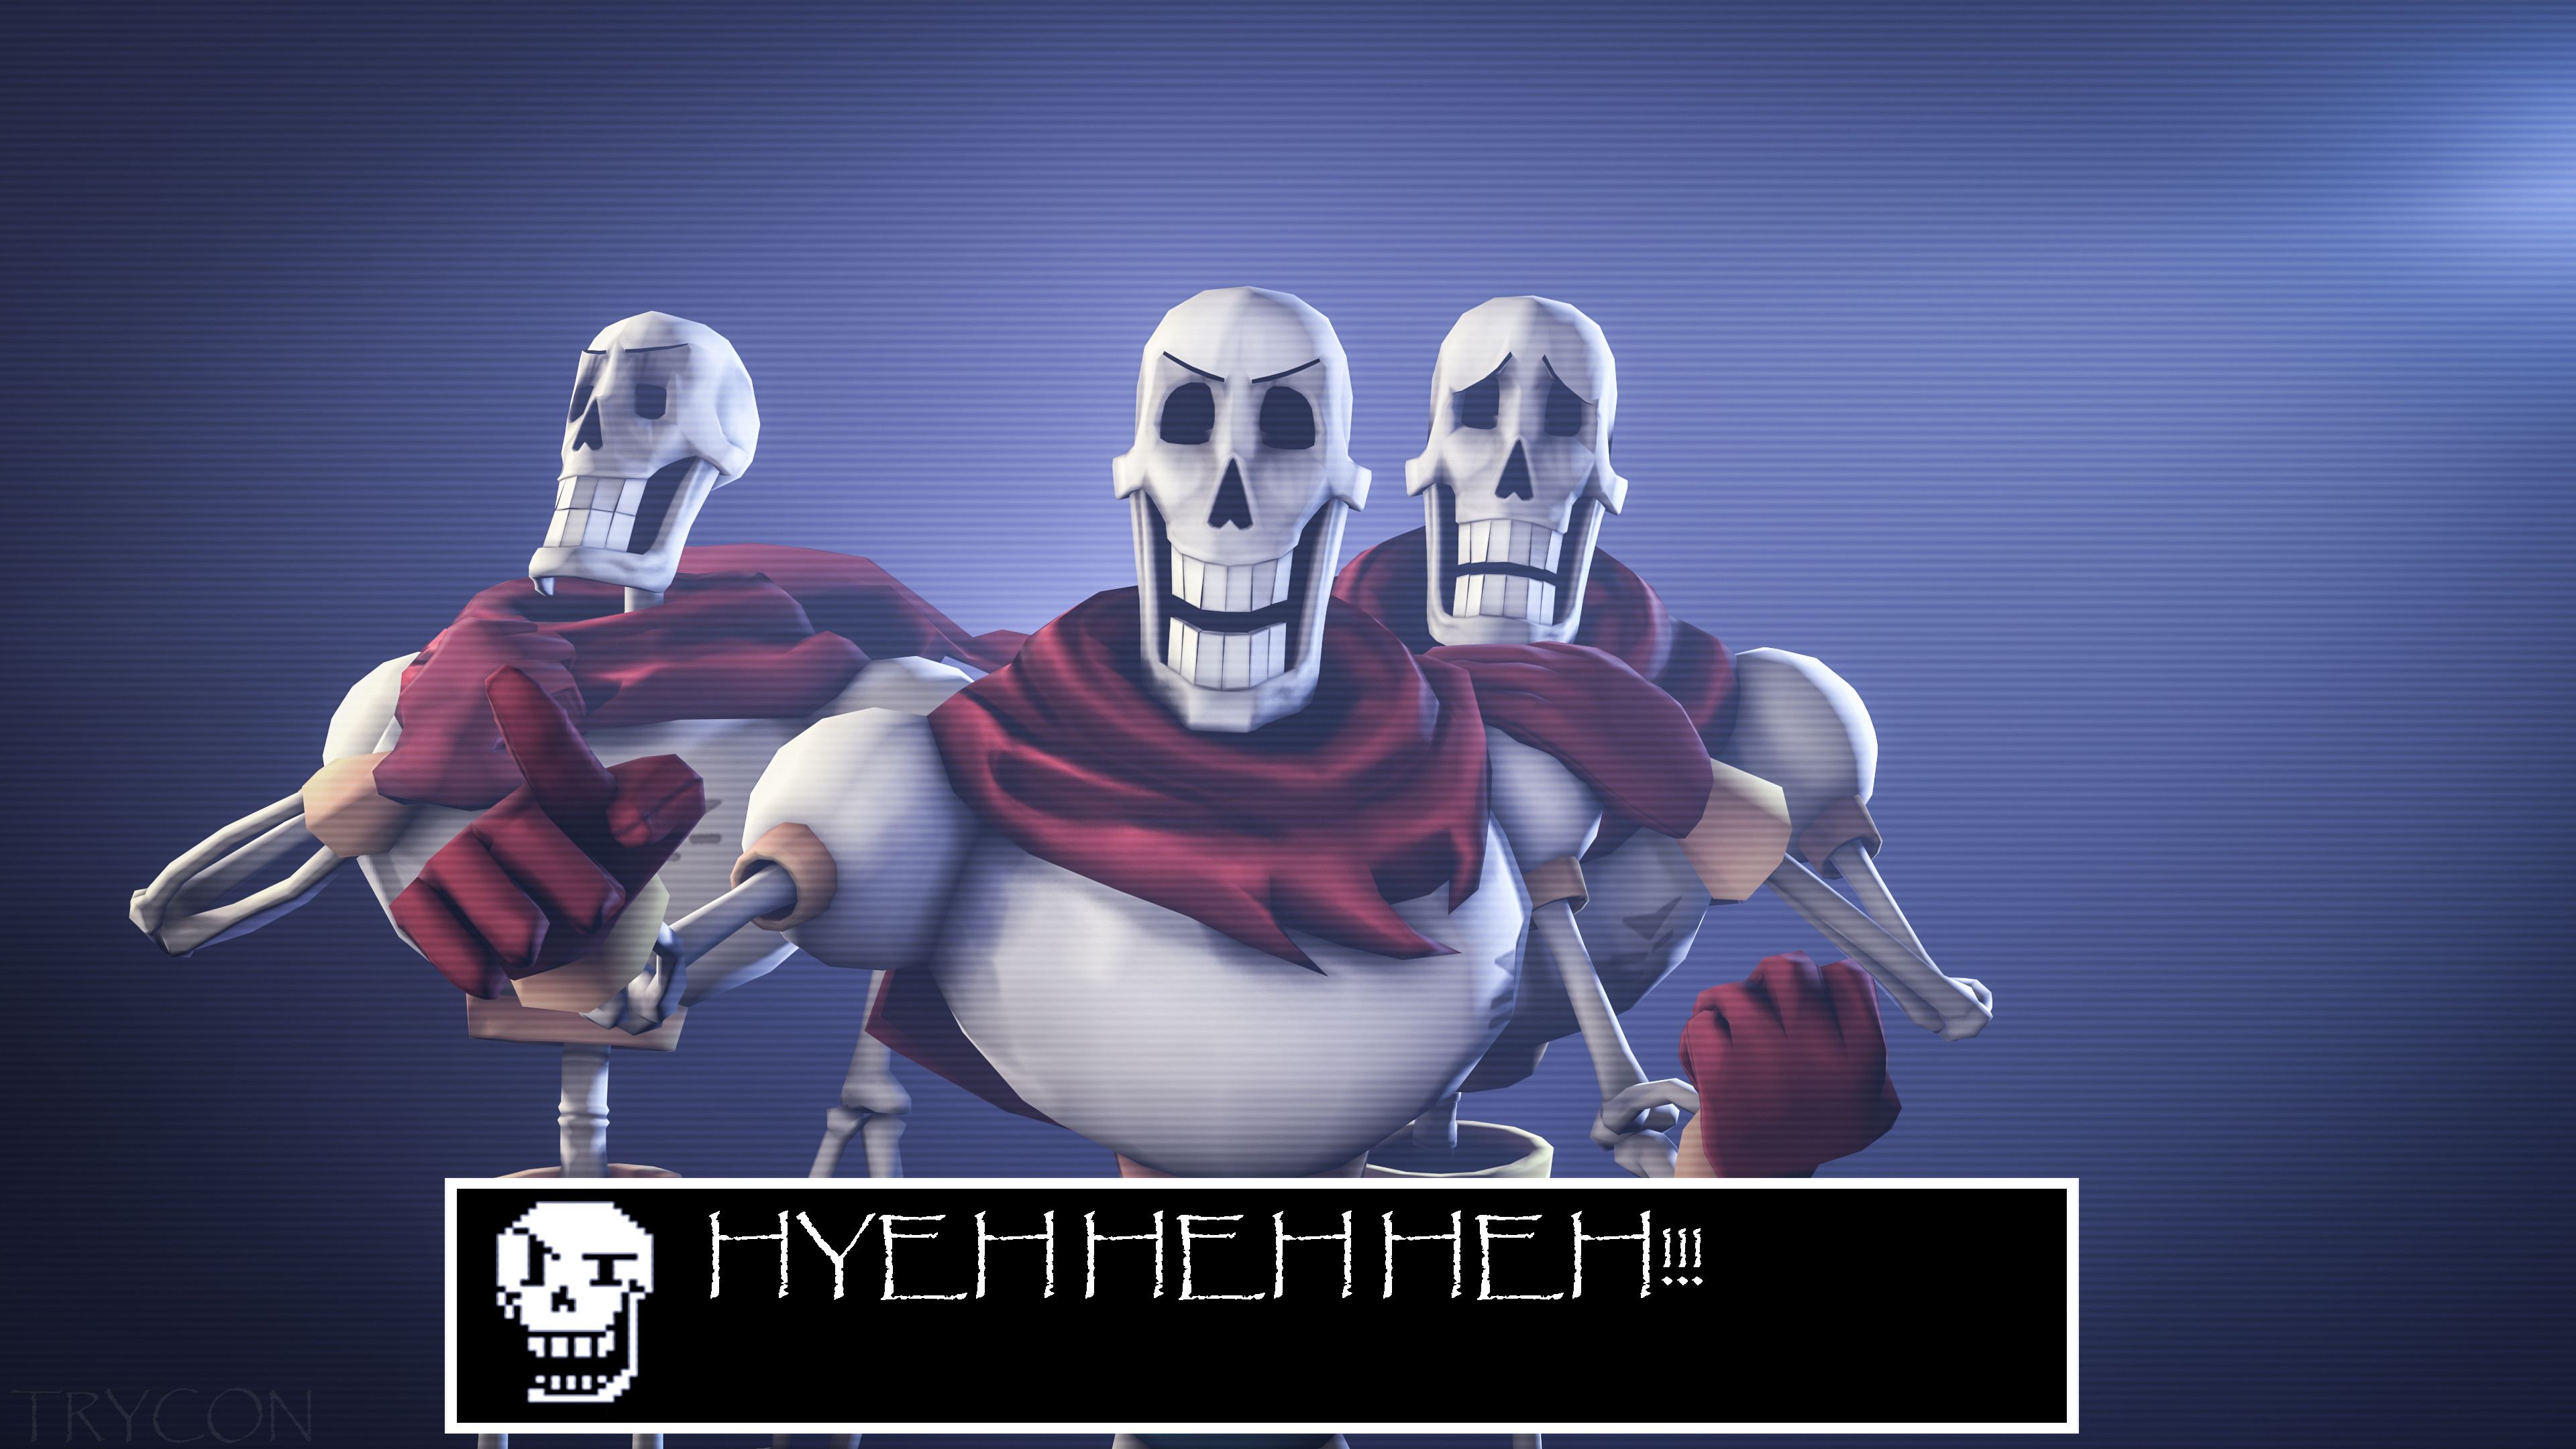 3840x2160 [Undertale] Papyrus by Trycon1980 on DeviantArt